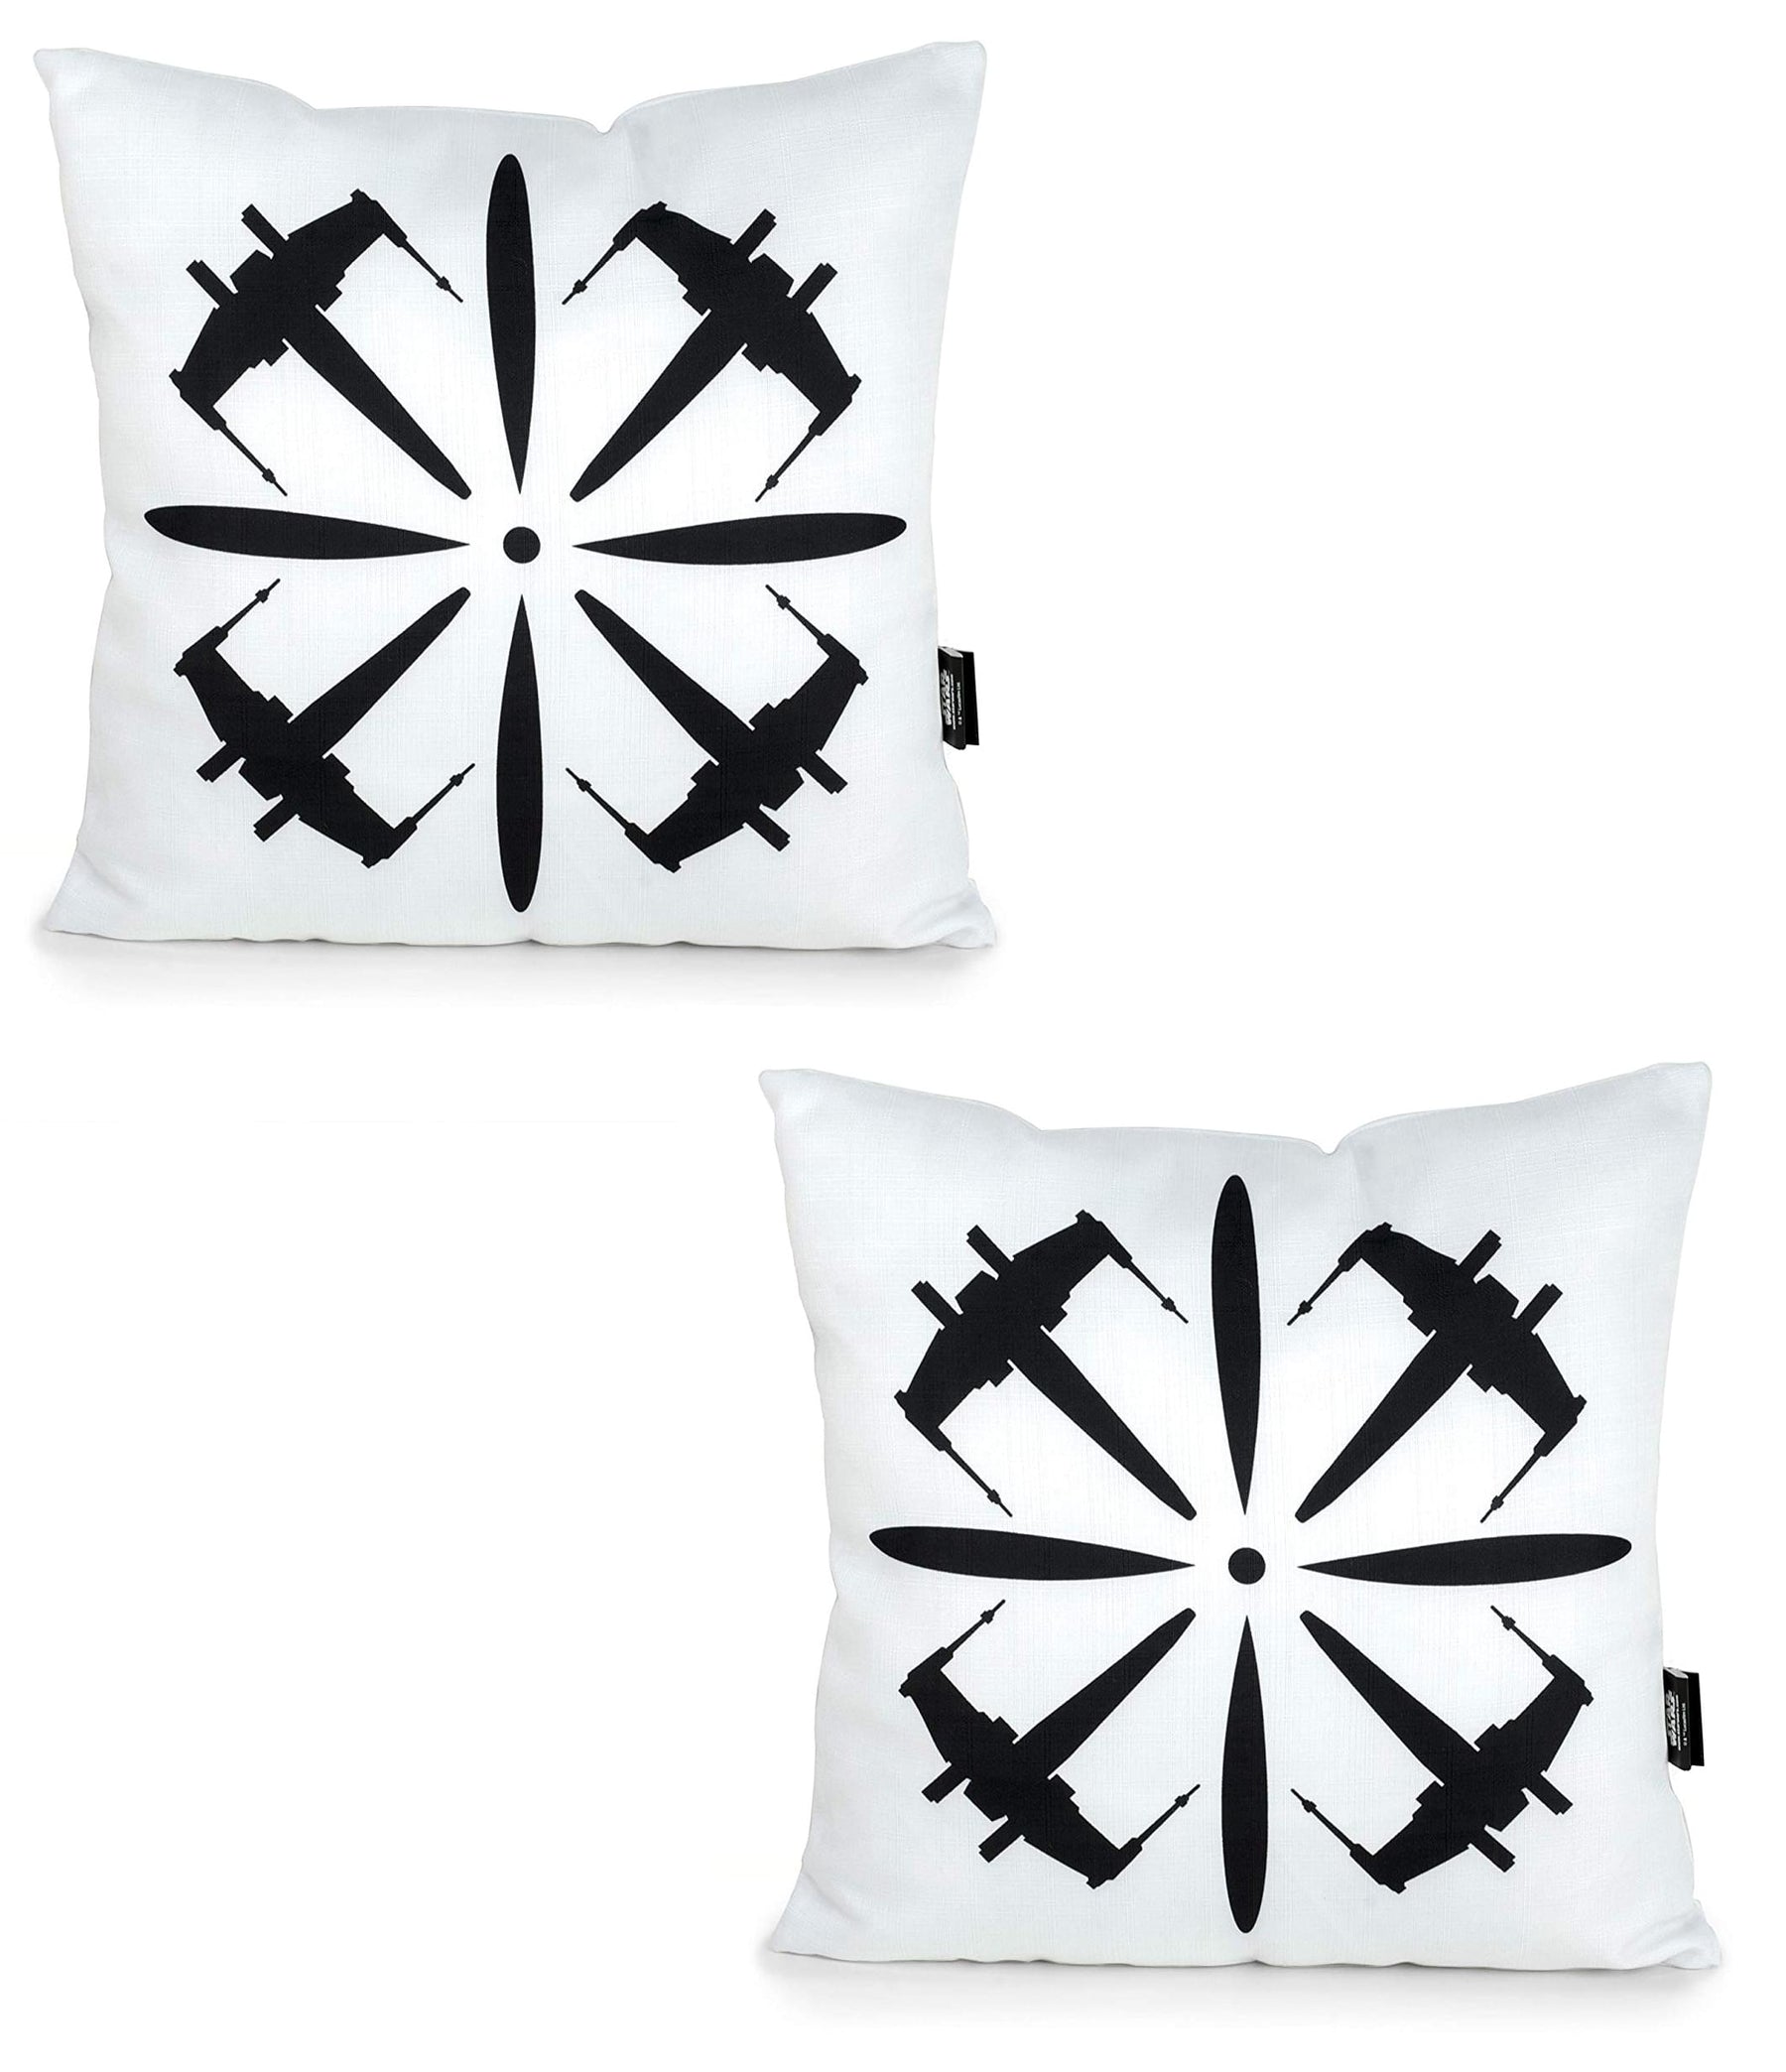 Star Wars White Throw Pillow | Black X-Wing Design | 18 x 18 Inches | Set of 2